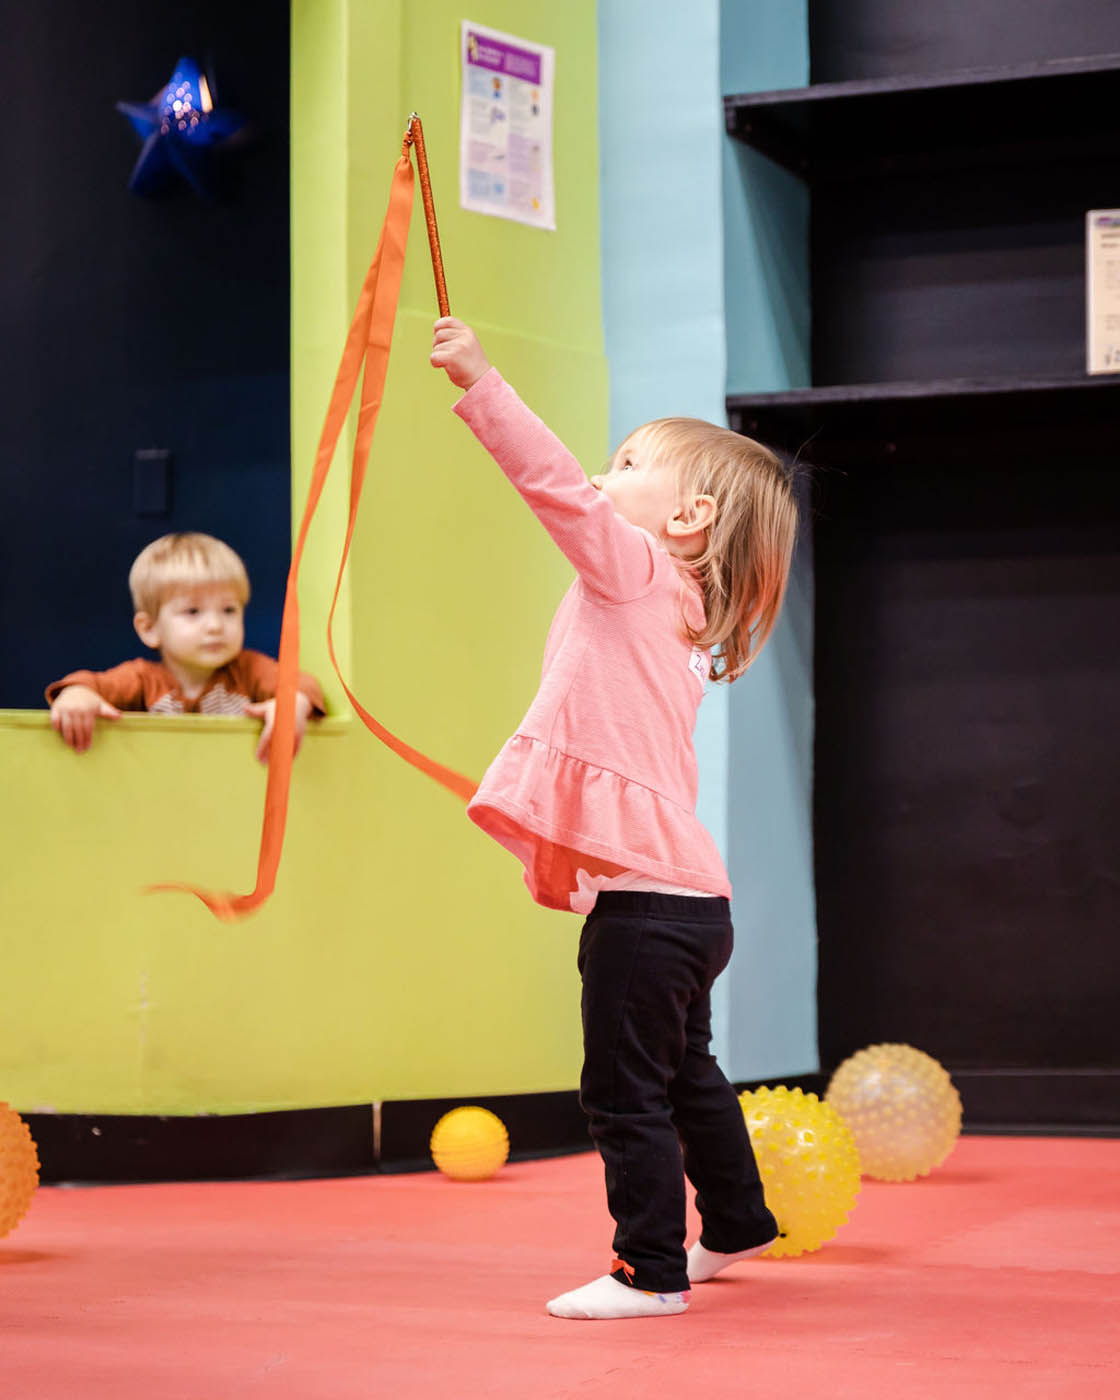 A little girl playing with ribbons and increasing her motor skills in sports classes with Romp n' Roll Pittsburgh.